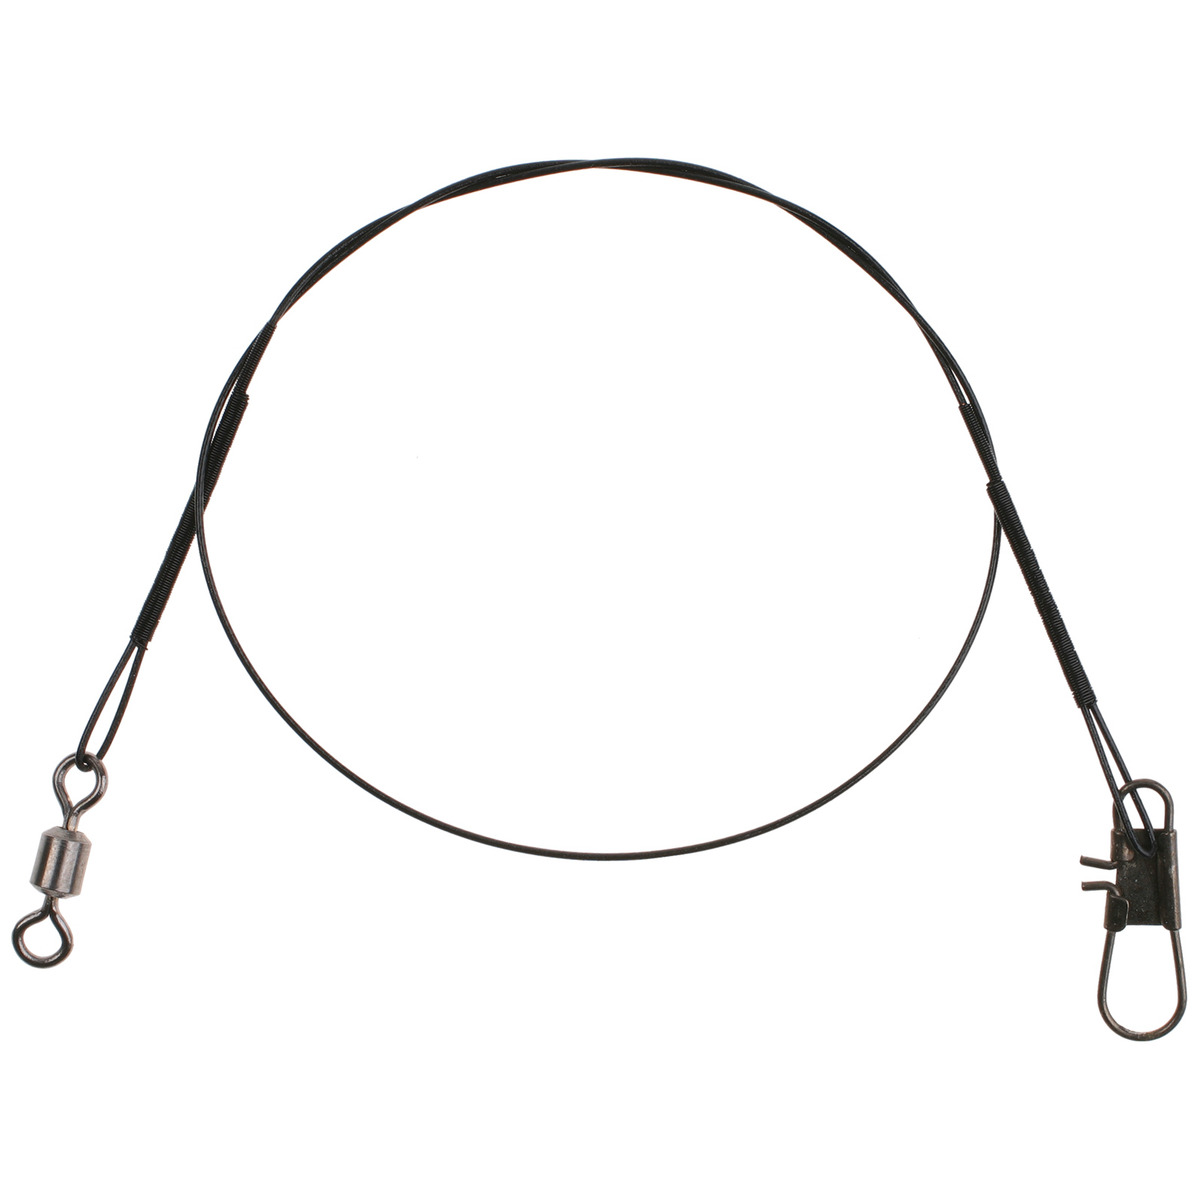 Mikado Steel Leaderwith Swivel And Double Treble Hook - 25 cm / 10kg